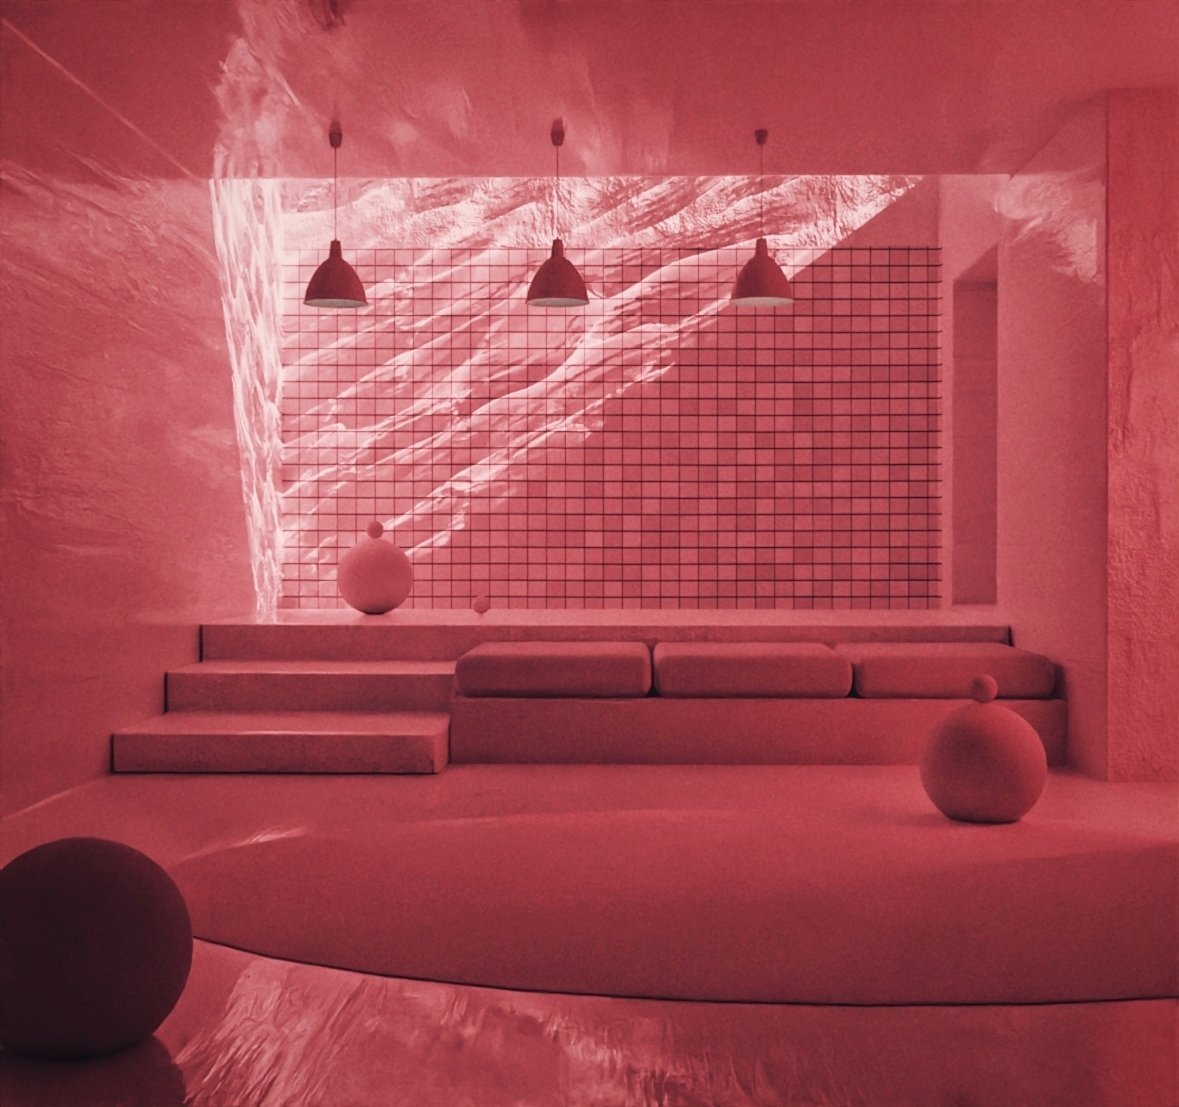 under the Pink Sea
#liminalspace #dreamcore #architecture #poolcore